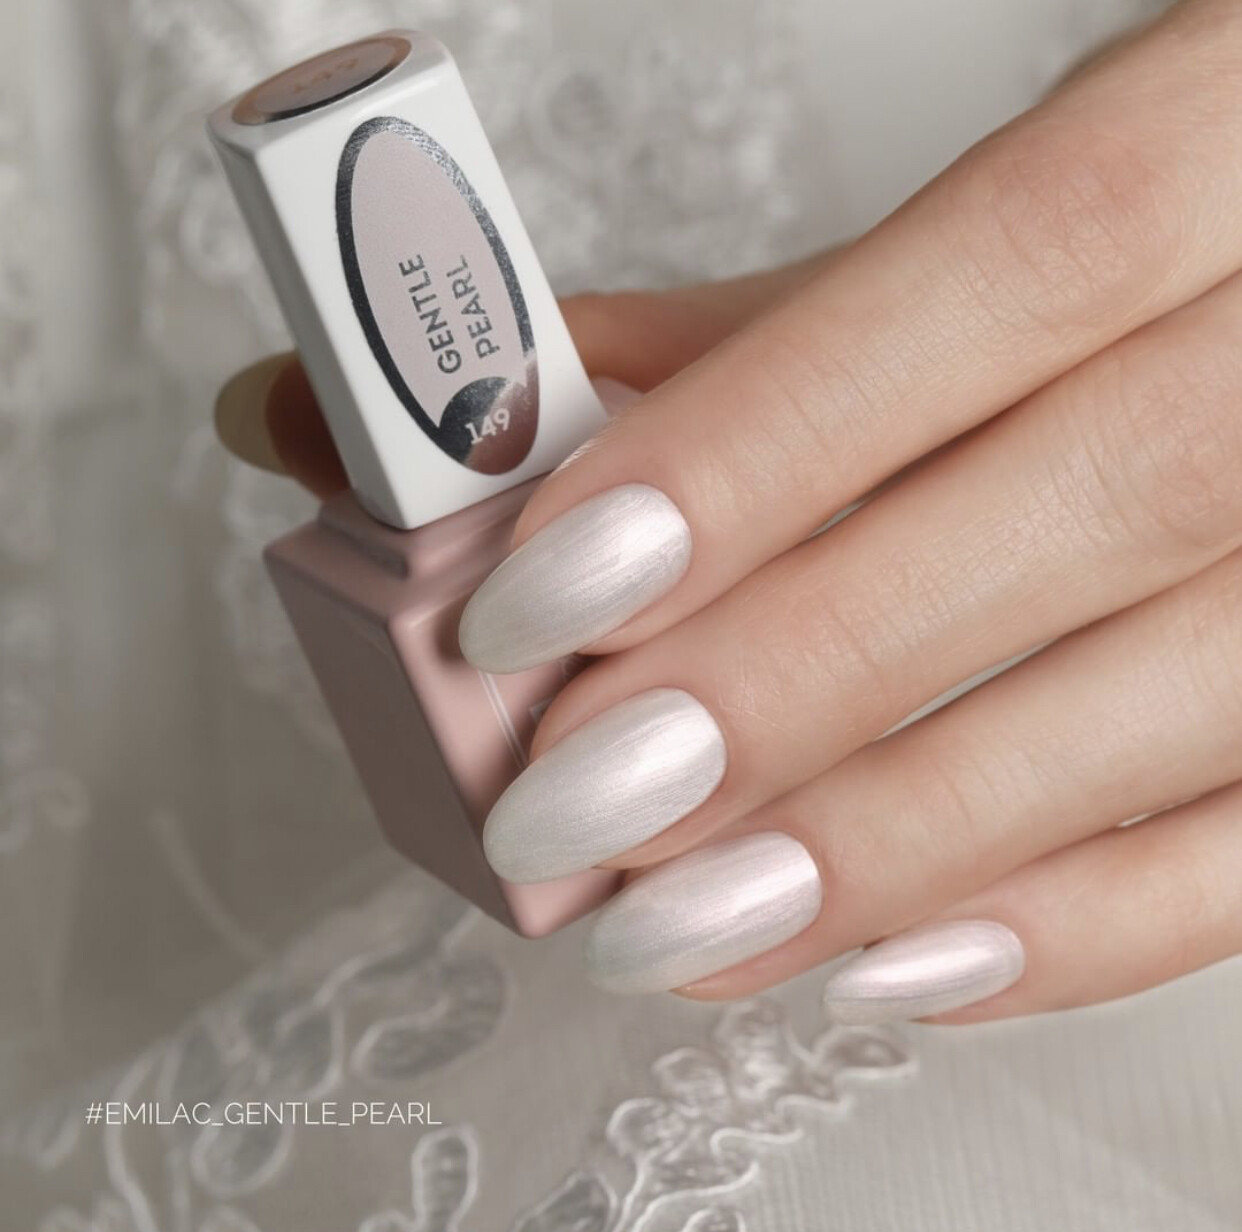 E.MiLac #149 Gentle Pearl — pearly white shade with a fine purple-pink shine